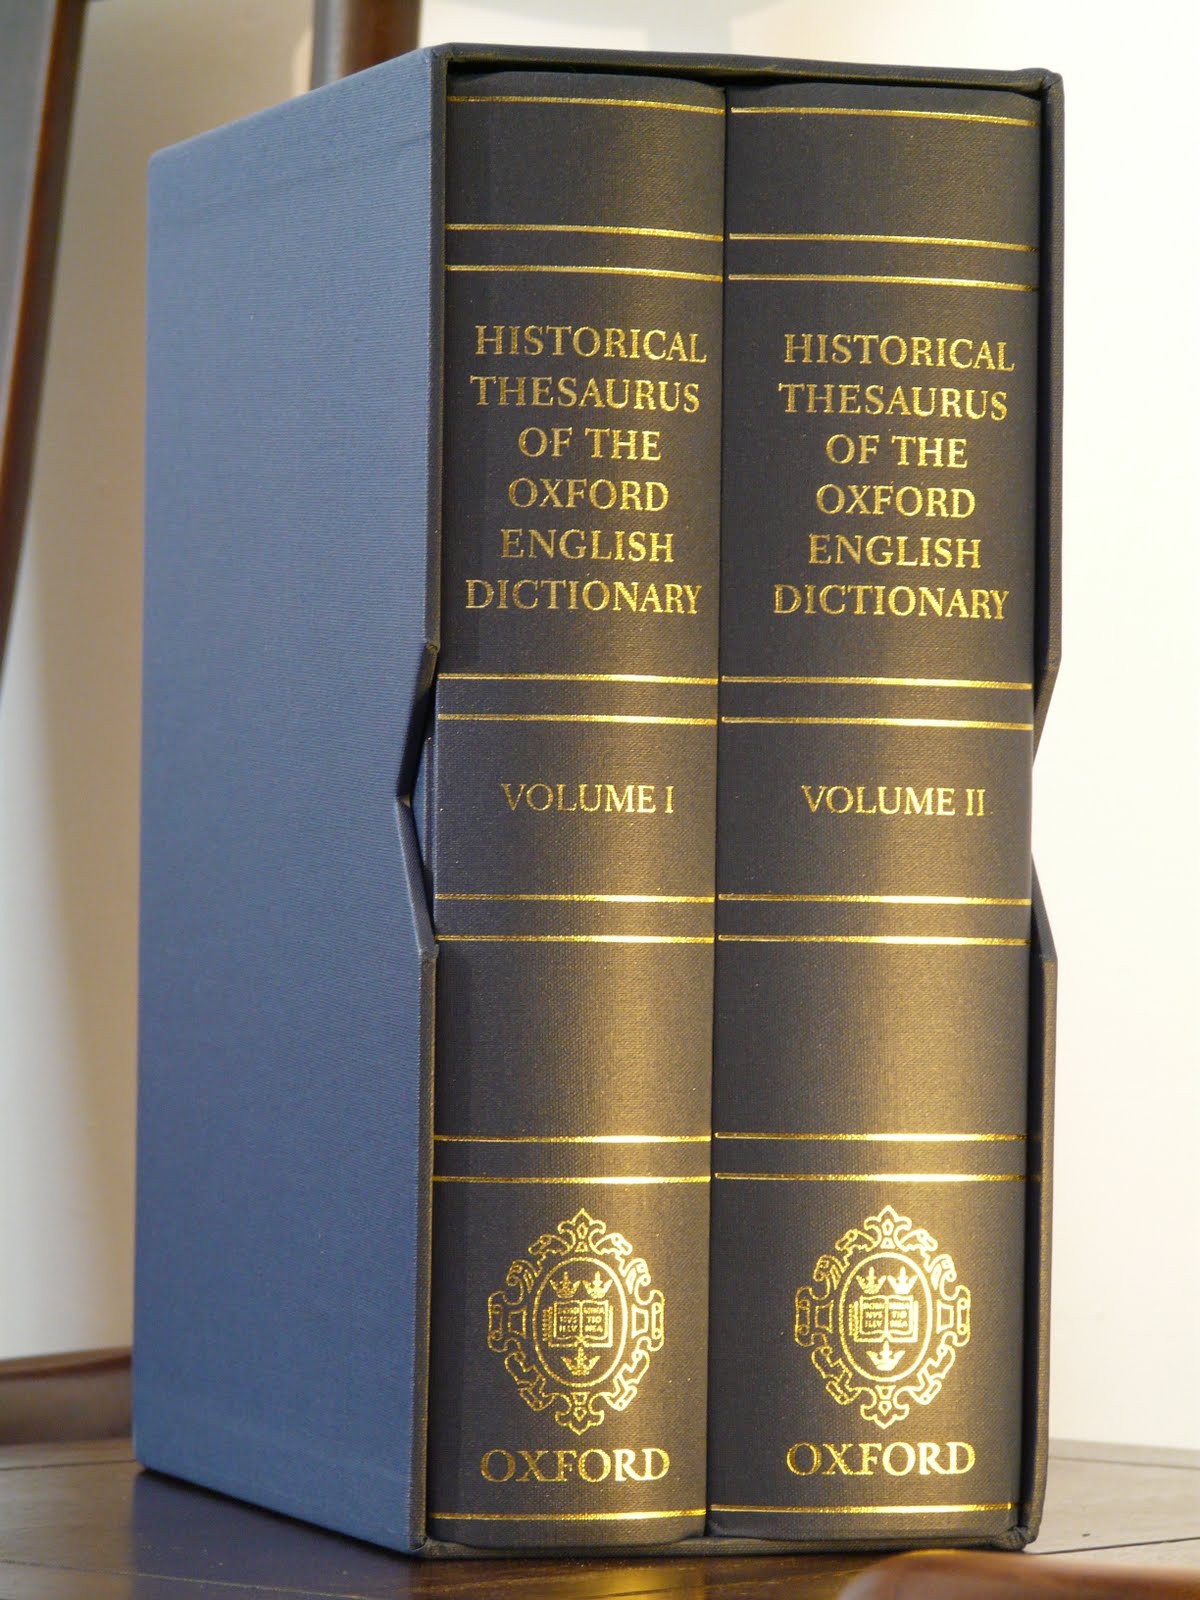 historical thesaurus of the oxford english dictionary pdf